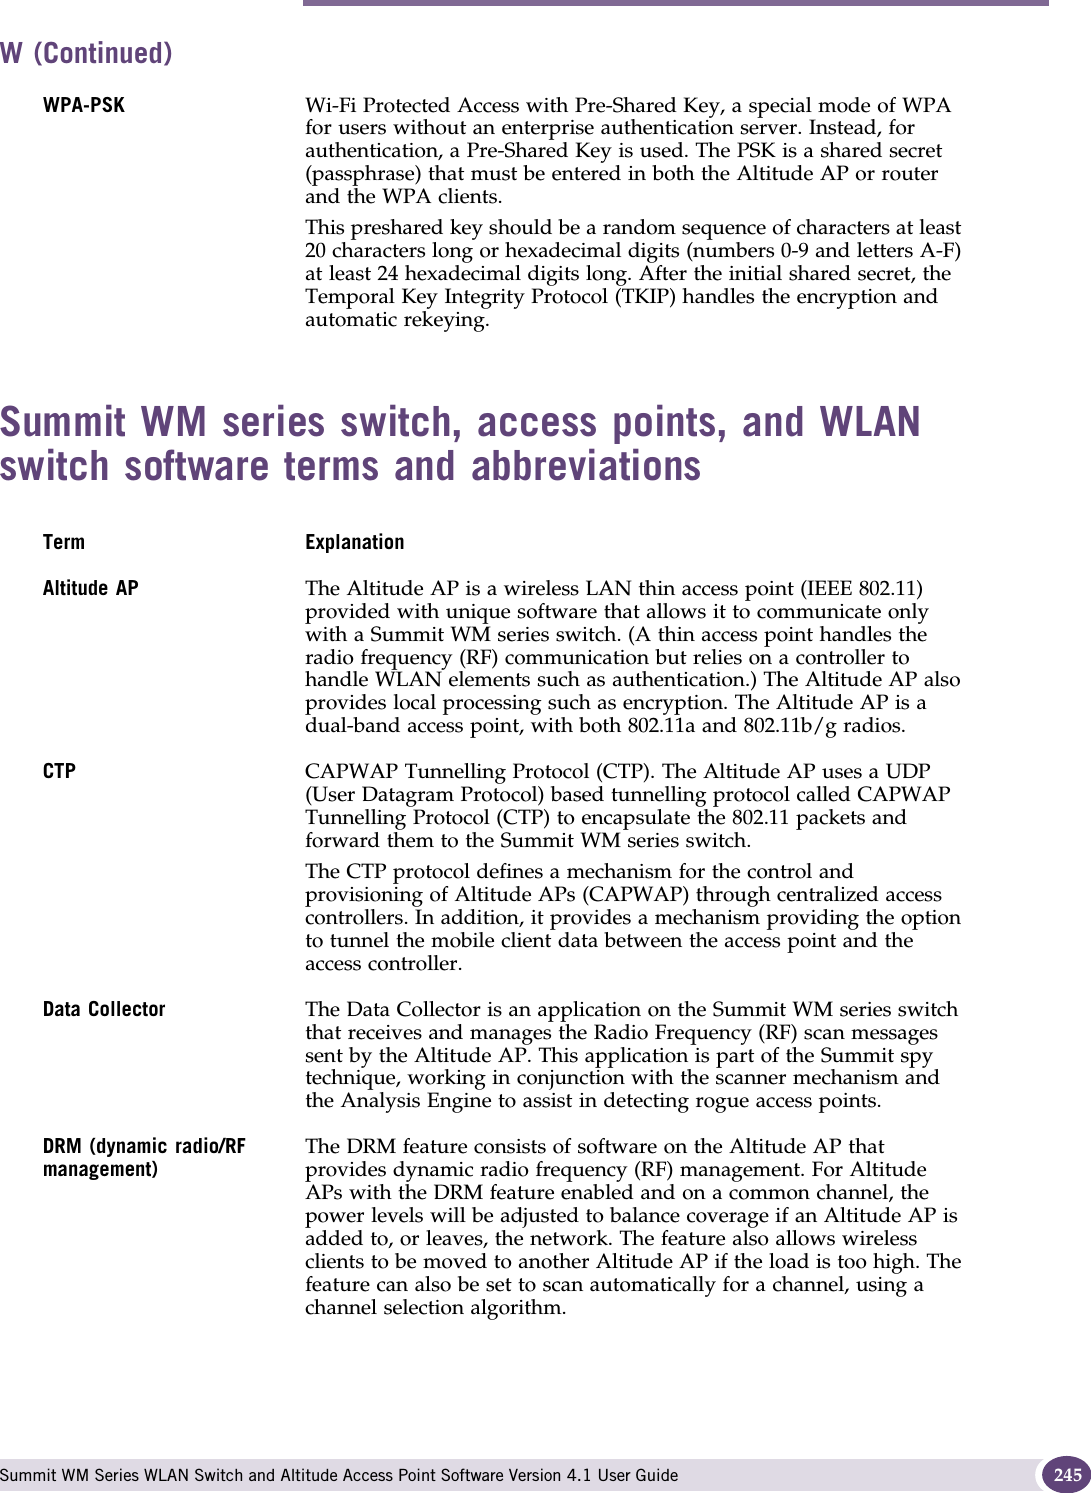 W Summit WM Series WLAN Switch and Altitude Access Point Software Version 4.1 User Guide 245Summit WM series switch, access points, and WLAN switch software terms and abbreviationsWPA-PSK Wi-Fi Protected Access with Pre-Shared Key, a special mode of WPA for users without an enterprise authentication server. Instead, for authentication, a Pre-Shared Key is used. The PSK is a shared secret (passphrase) that must be entered in both the Altitude AP or router and the WPA clients. This preshared key should be a random sequence of characters at least 20 characters long or hexadecimal digits (numbers 0-9 and letters A-F) at least 24 hexadecimal digits long. After the initial shared secret, the Temporal Key Integrity Protocol (TKIP) handles the encryption and automatic rekeying.Term ExplanationAltitude AP The Altitude AP is a wireless LAN thin access point (IEEE 802.11) provided with unique software that allows it to communicate only with a Summit WM series switch. (A thin access point handles the radio frequency (RF) communication but relies on a controller to handle WLAN elements such as authentication.) The Altitude AP also provides local processing such as encryption. The Altitude AP is a dual-band access point, with both 802.11a and 802.11b/g radios.CTP CAPWAP Tunnelling Protocol (CTP). The Altitude AP uses a UDP (User Datagram Protocol) based tunnelling protocol called CAPWAP Tunnelling Protocol (CTP) to encapsulate the 802.11 packets and forward them to the Summit WM series switch. The CTP protocol defines a mechanism for the control and provisioning of Altitude APs (CAPWAP) through centralized access controllers. In addition, it provides a mechanism providing the option to tunnel the mobile client data between the access point and the access controller. Data Collector The Data Collector is an application on the Summit WM series switch that receives and manages the Radio Frequency (RF) scan messages sent by the Altitude AP. This application is part of the Summit spy technique, working in conjunction with the scanner mechanism and the Analysis Engine to assist in detecting rogue access points.DRM (dynamic radio/RF management)The DRM feature consists of software on the Altitude AP that provides dynamic radio frequency (RF) management. For Altitude APs with the DRM feature enabled and on a common channel, the power levels will be adjusted to balance coverage if an Altitude AP is added to, or leaves, the network. The feature also allows wireless clients to be moved to another Altitude AP if the load is too high. The feature can also be set to scan automatically for a channel, using a channel selection algorithm.W (Continued)